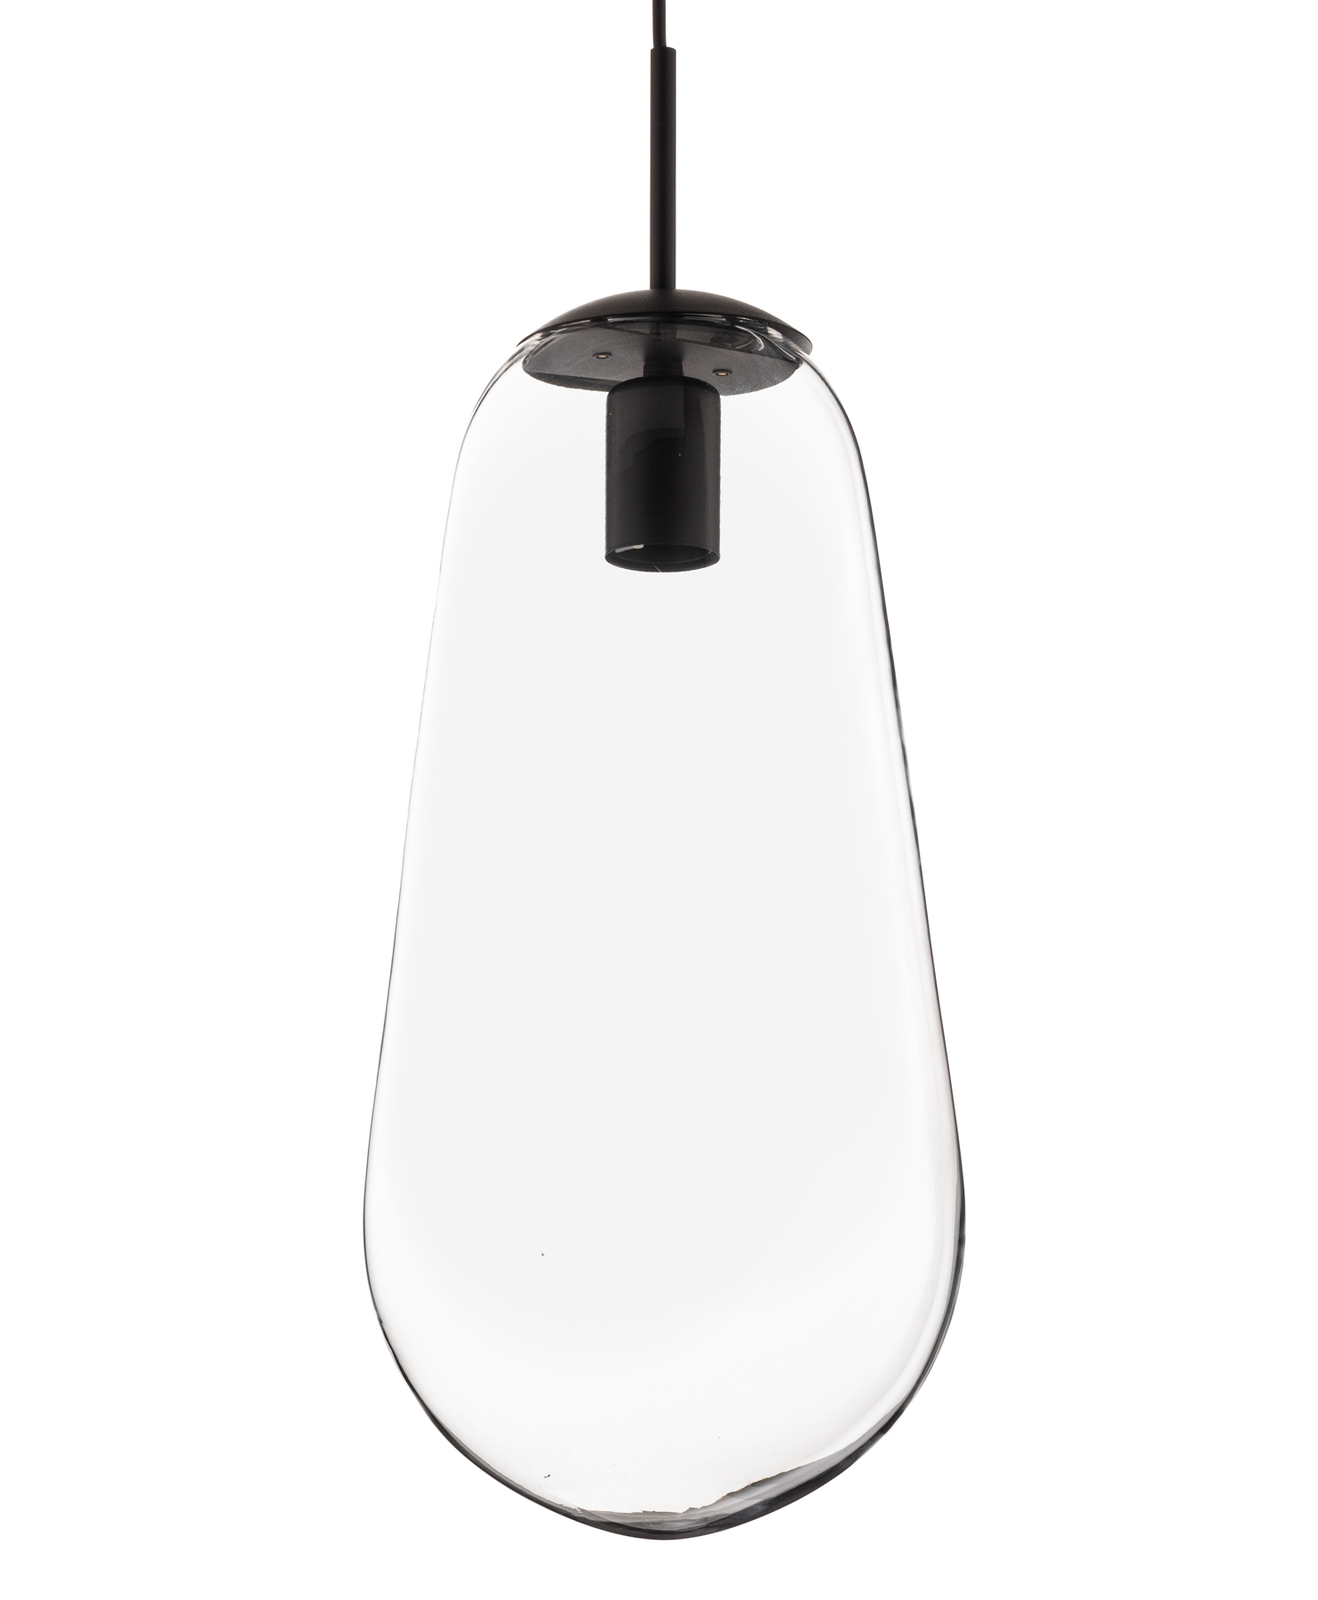 Pear L pendant light with glass shade, black